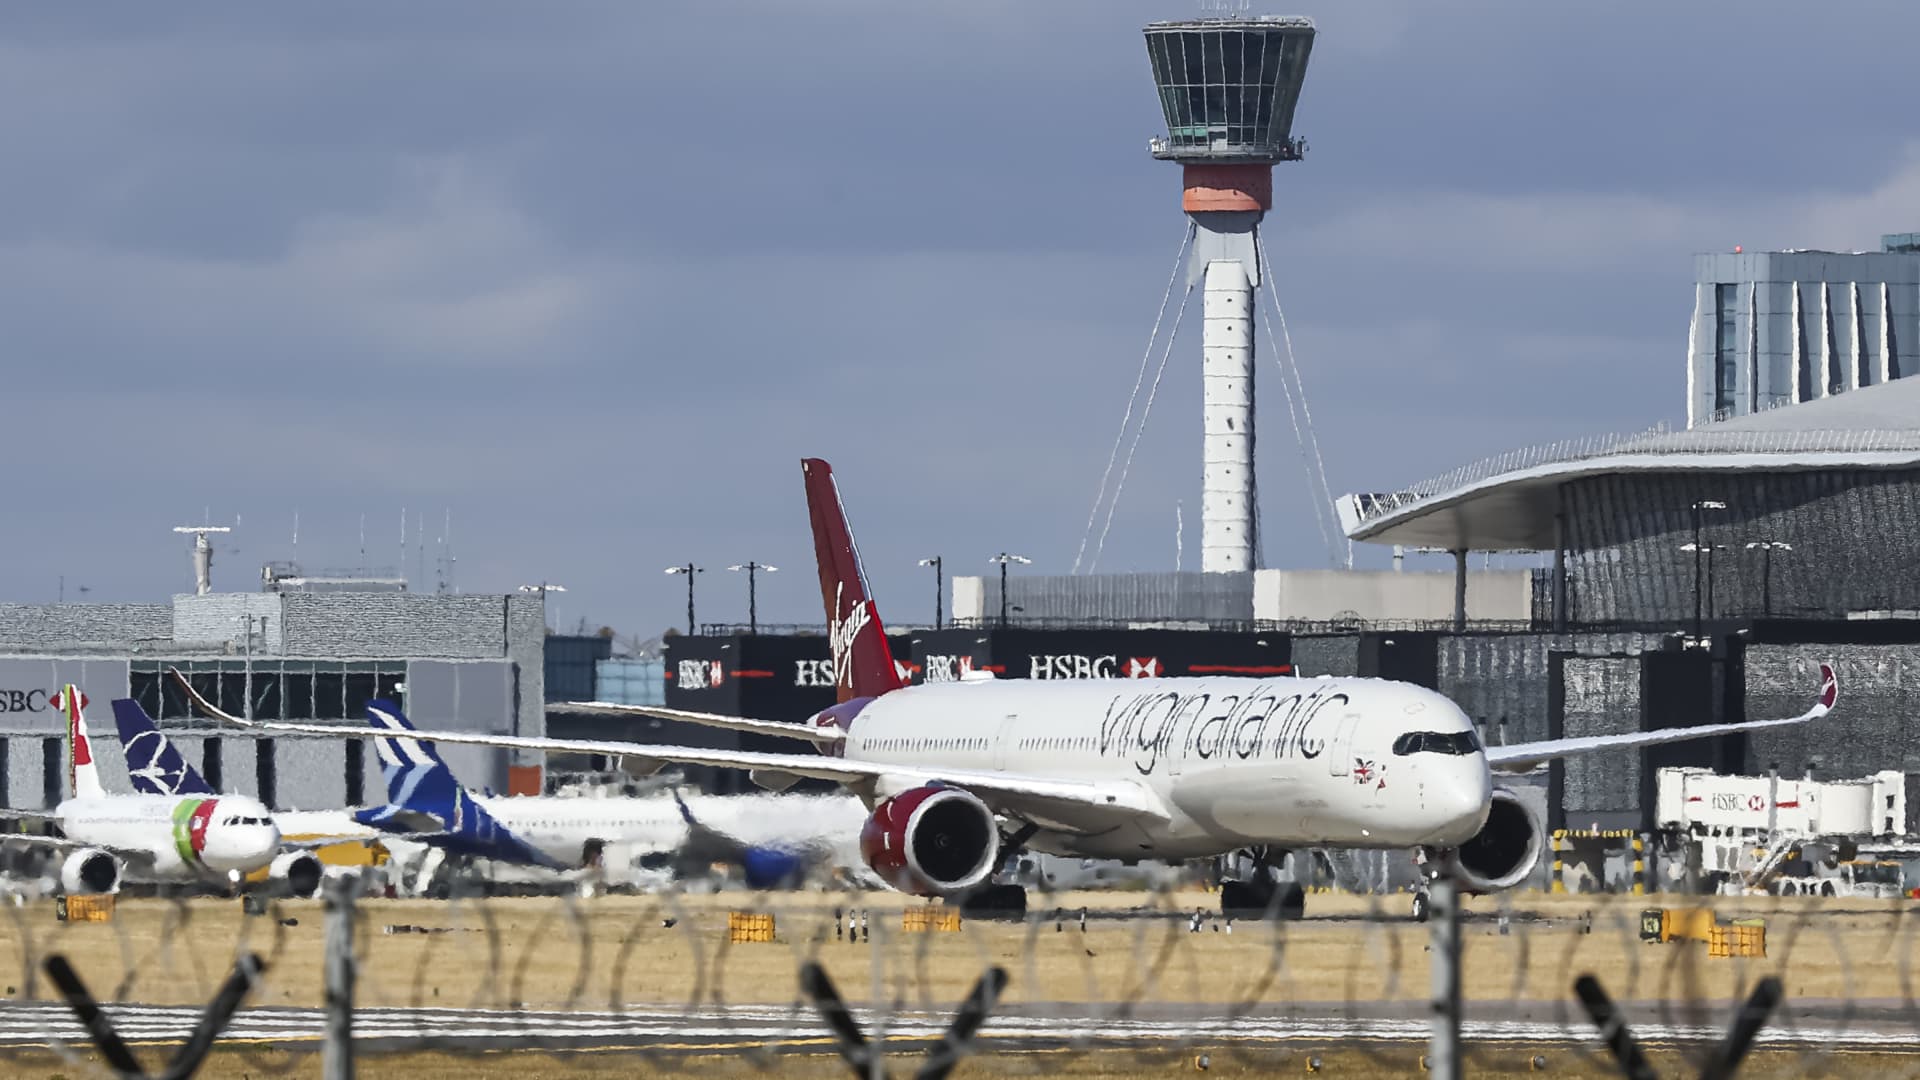 Flights disrupted across UK as air traffic control reports a ‘technical issue’